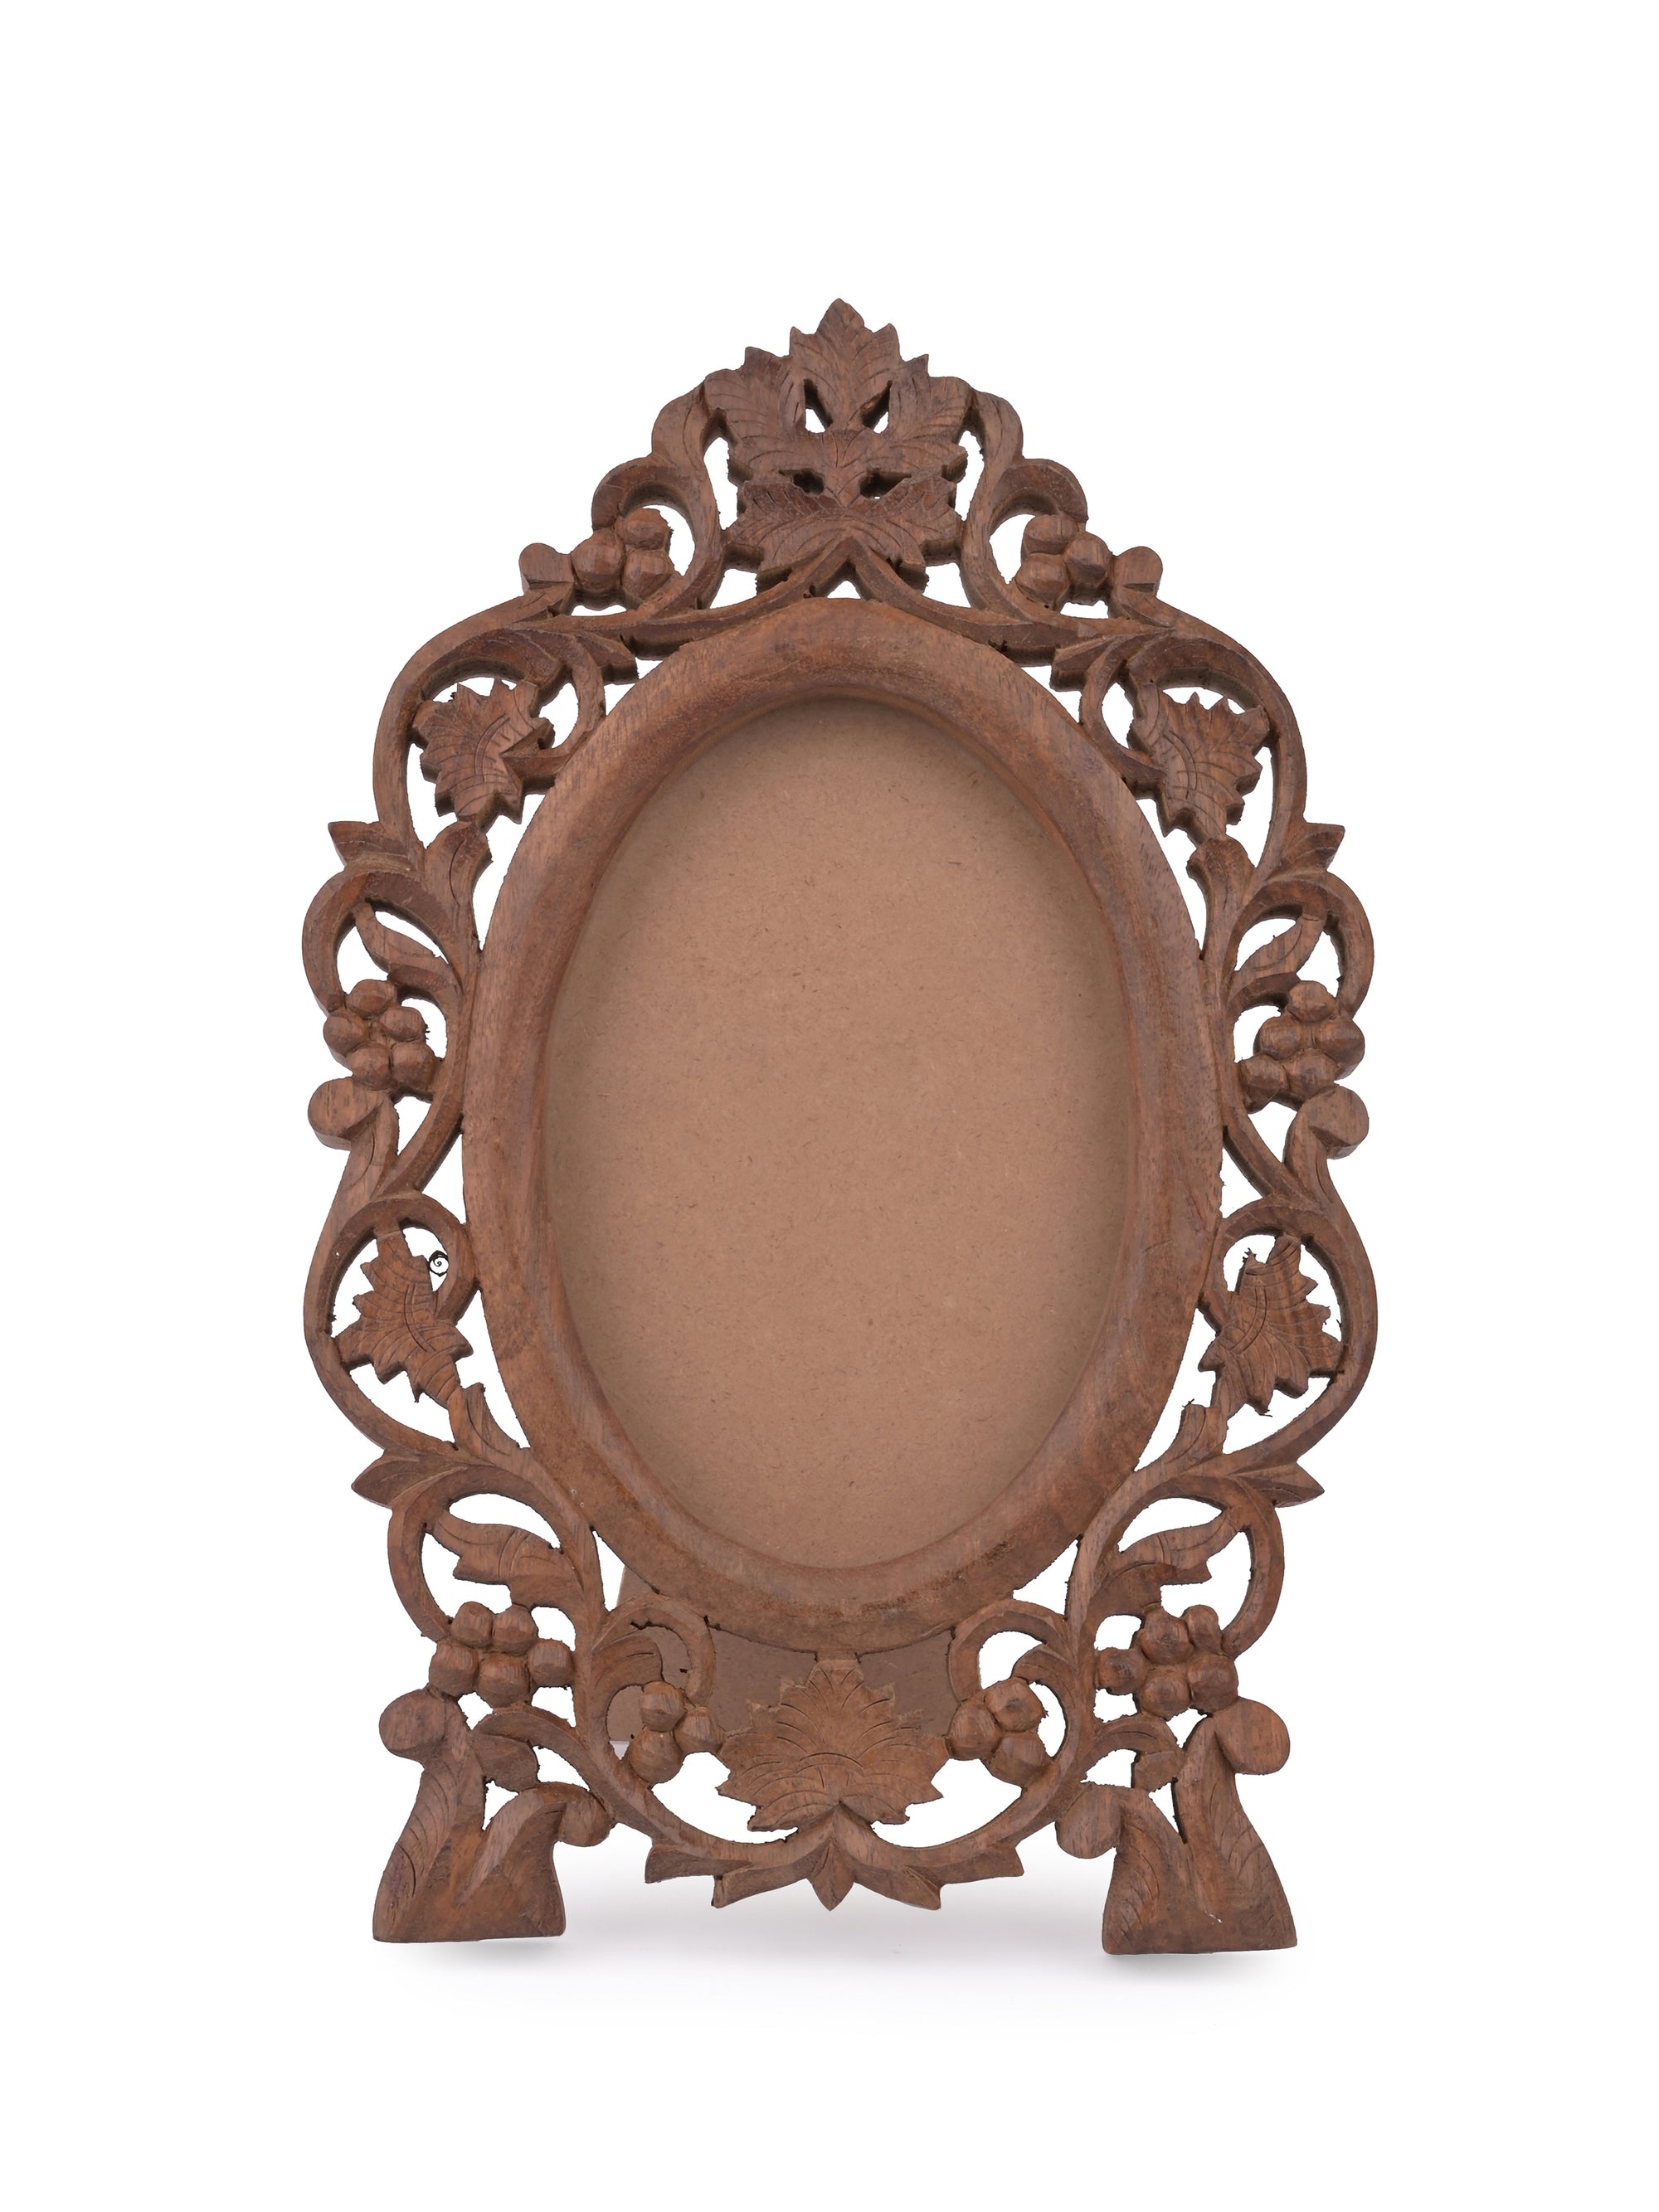 Wood crafted Royal Design Photo Frame in oval shape - The Heritage Artifacts